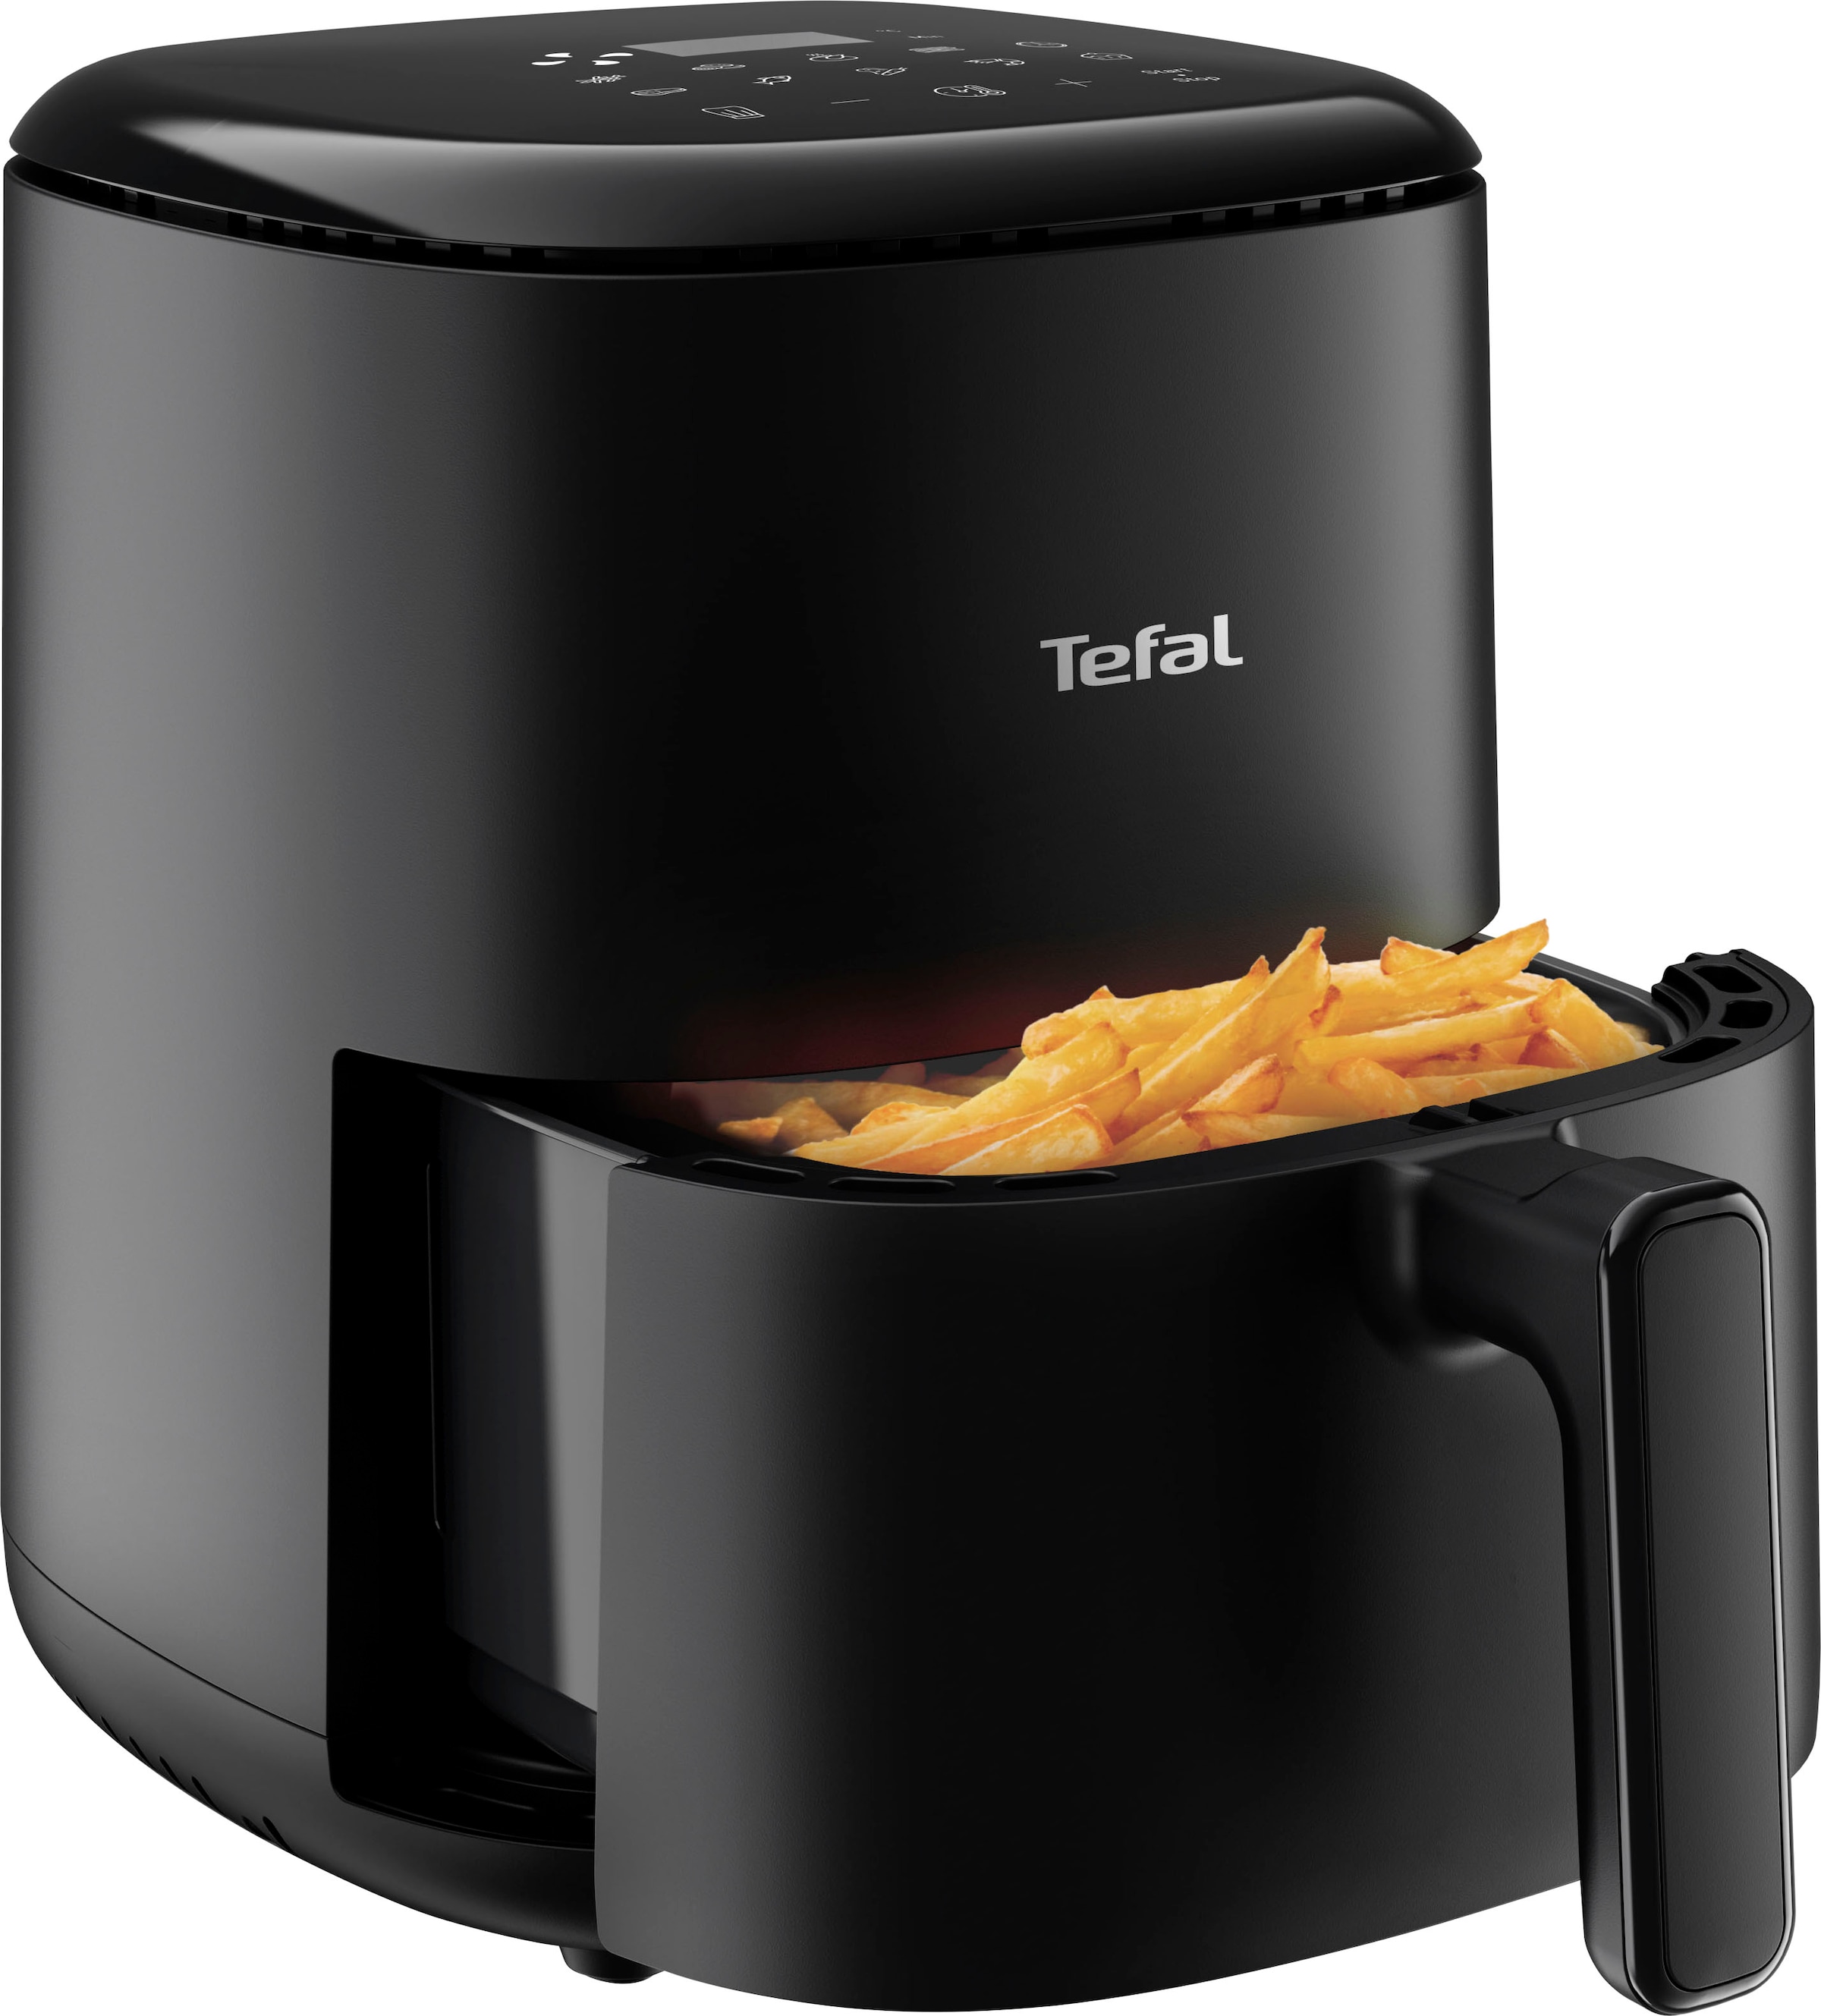 Tefal Heißluftfritteuse »EY1458 Easy Fry Compact«, 1300 W